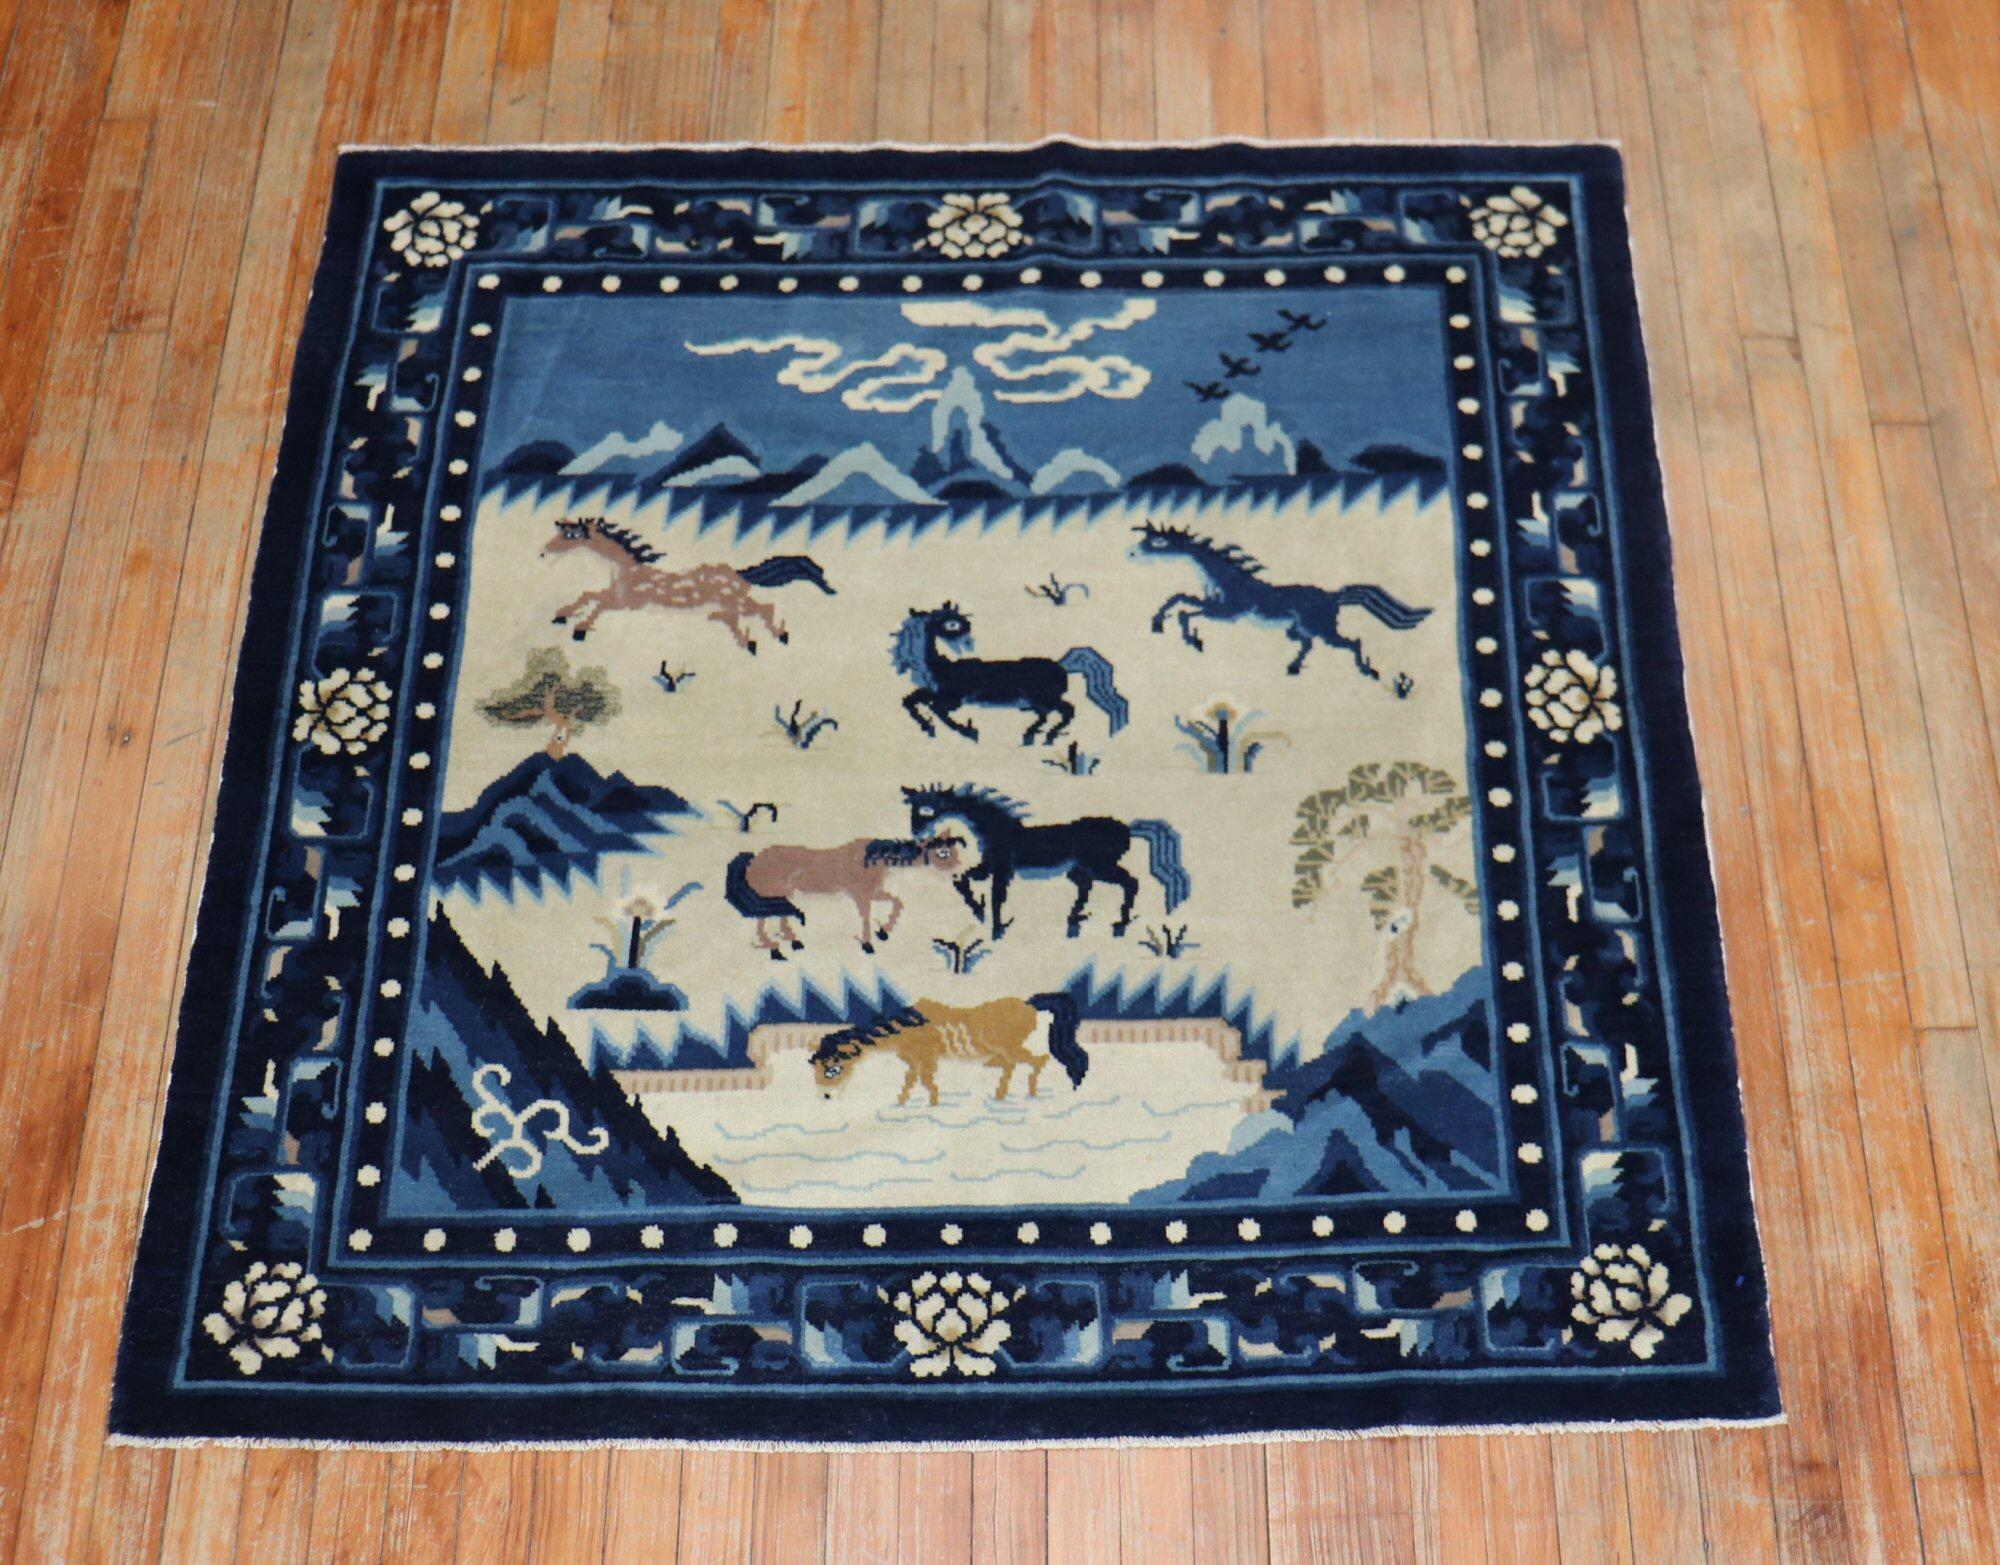 A mid-20th century conversational Chinese pictorial rug with a herd of horses on a beige field surrounded by a navy floral border.

Measures: 4'6